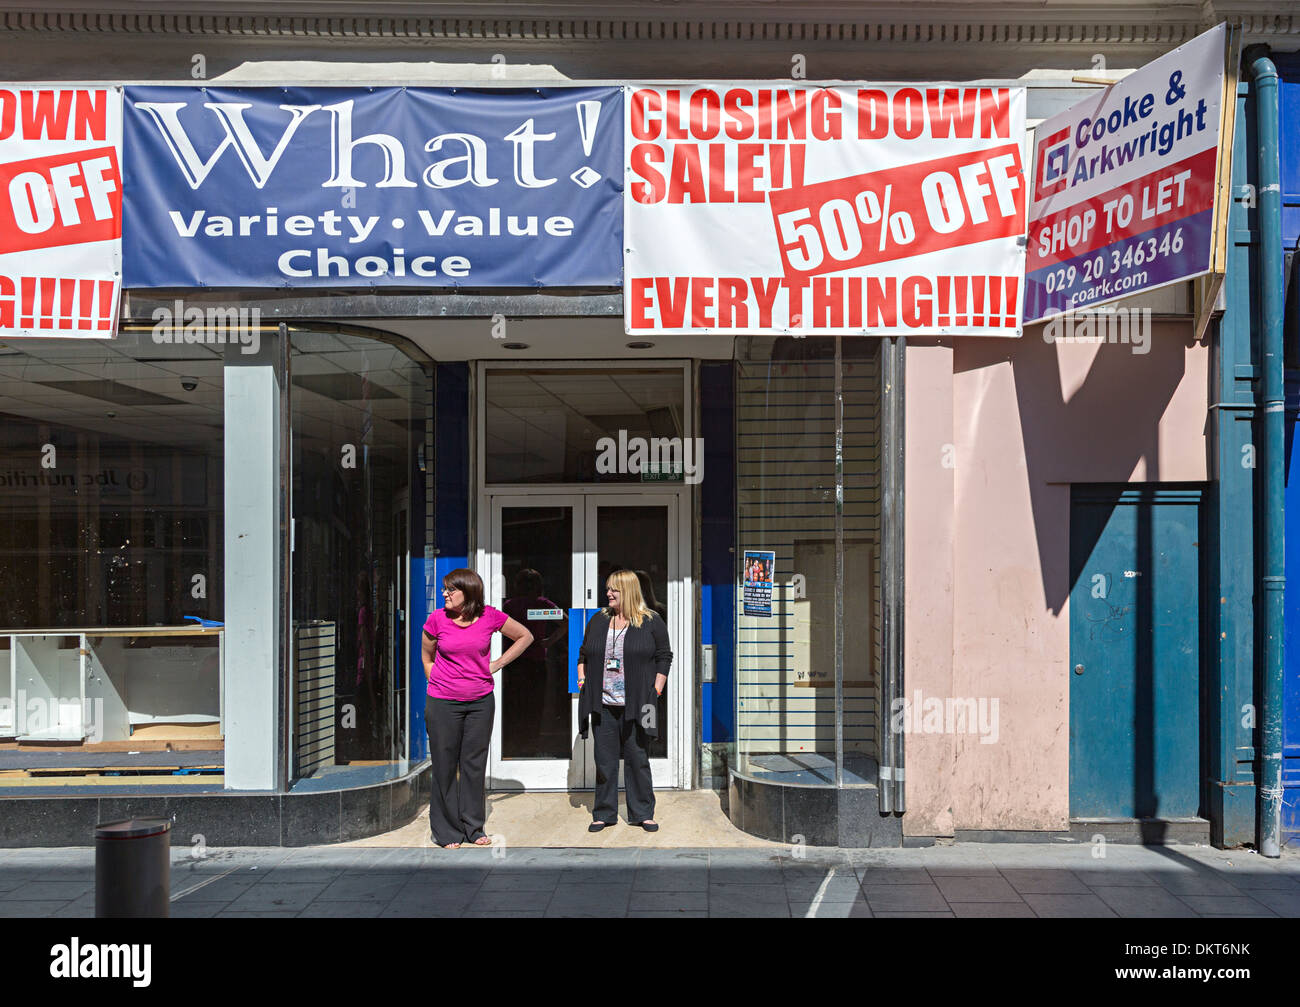 Closing down sale, 50% off everything, sign over What! shop with To Let, Newport, Gwent, Wales, UK Stock Photo